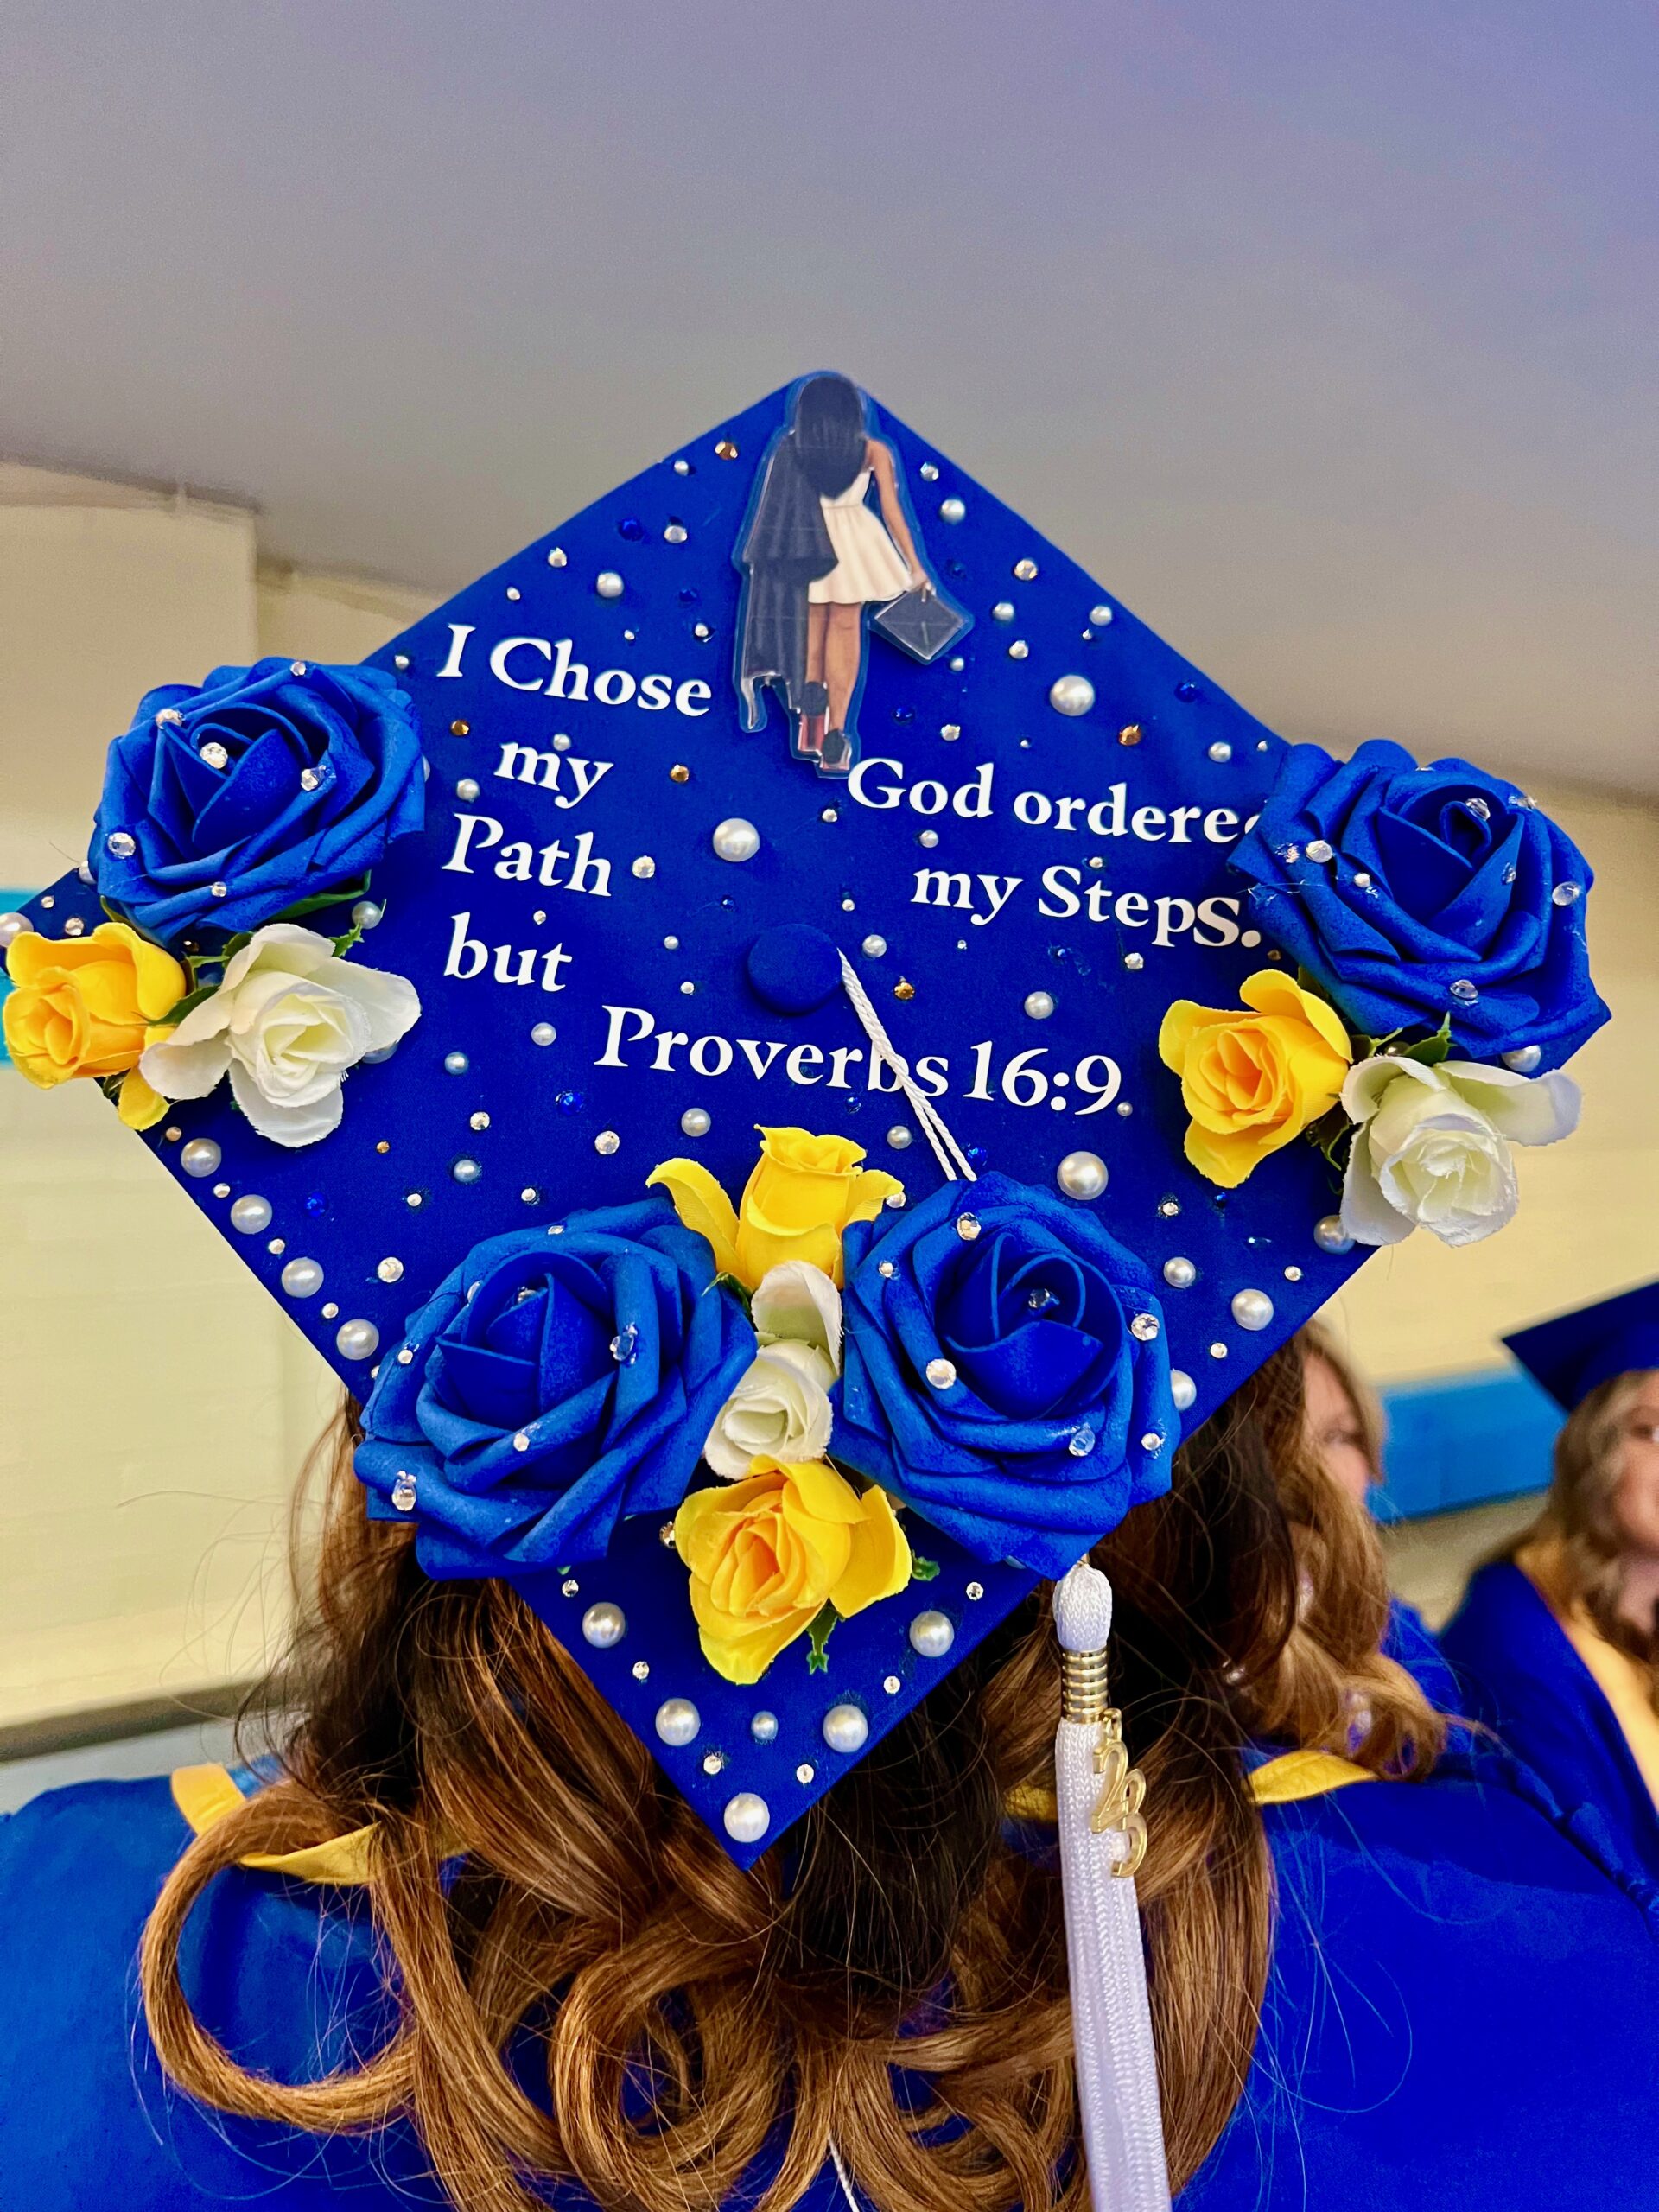 Decorated mortarboard reading "I chose my path but God ordered my steps. Proverbs 16:9"